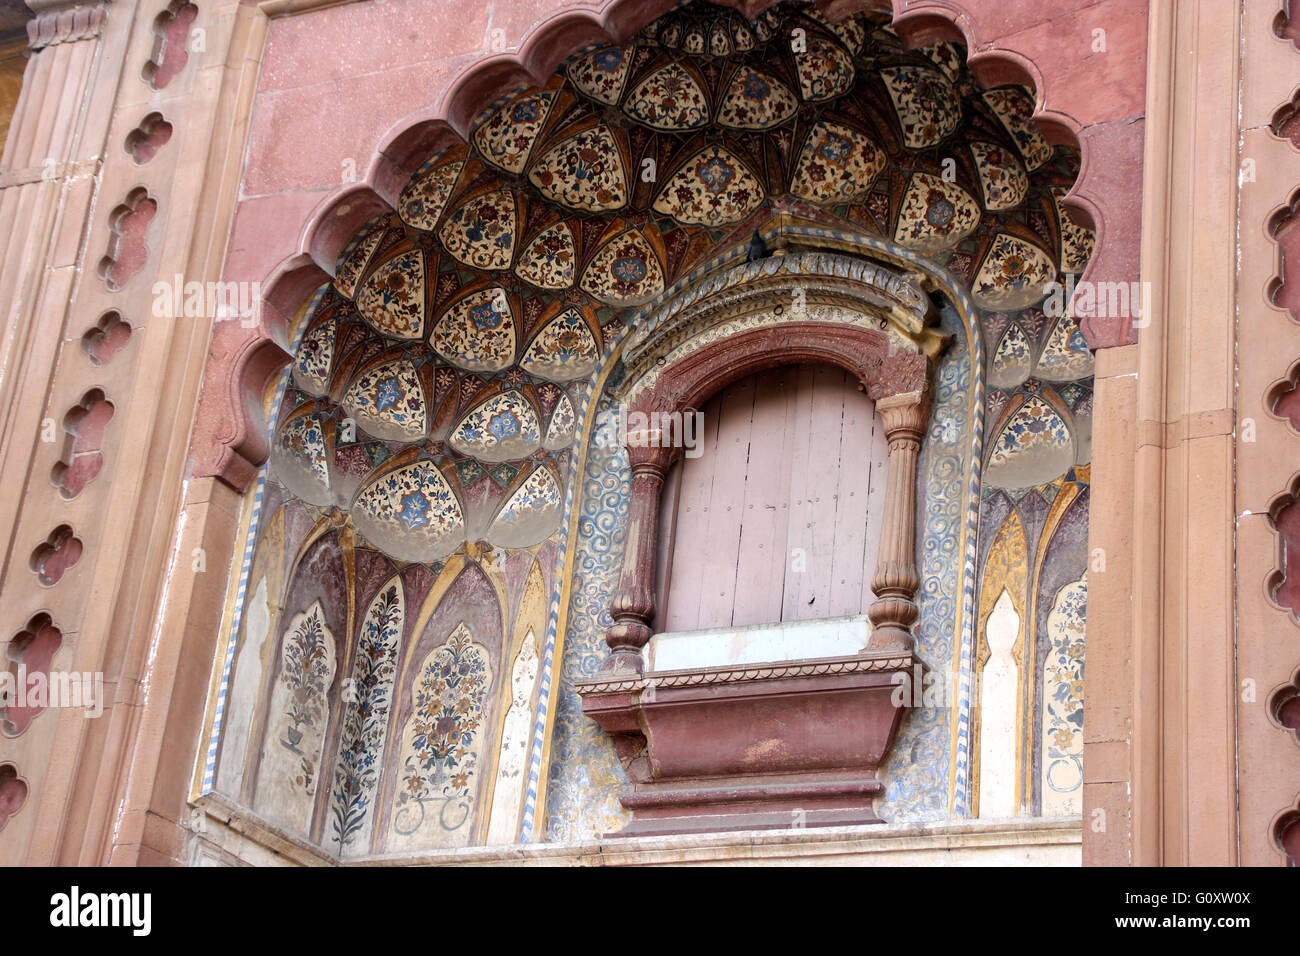 Main entrance of Safdarjung Tomb, Delhi, double storey entrance with decorated jharokha (arch) above the gate Stock Photo